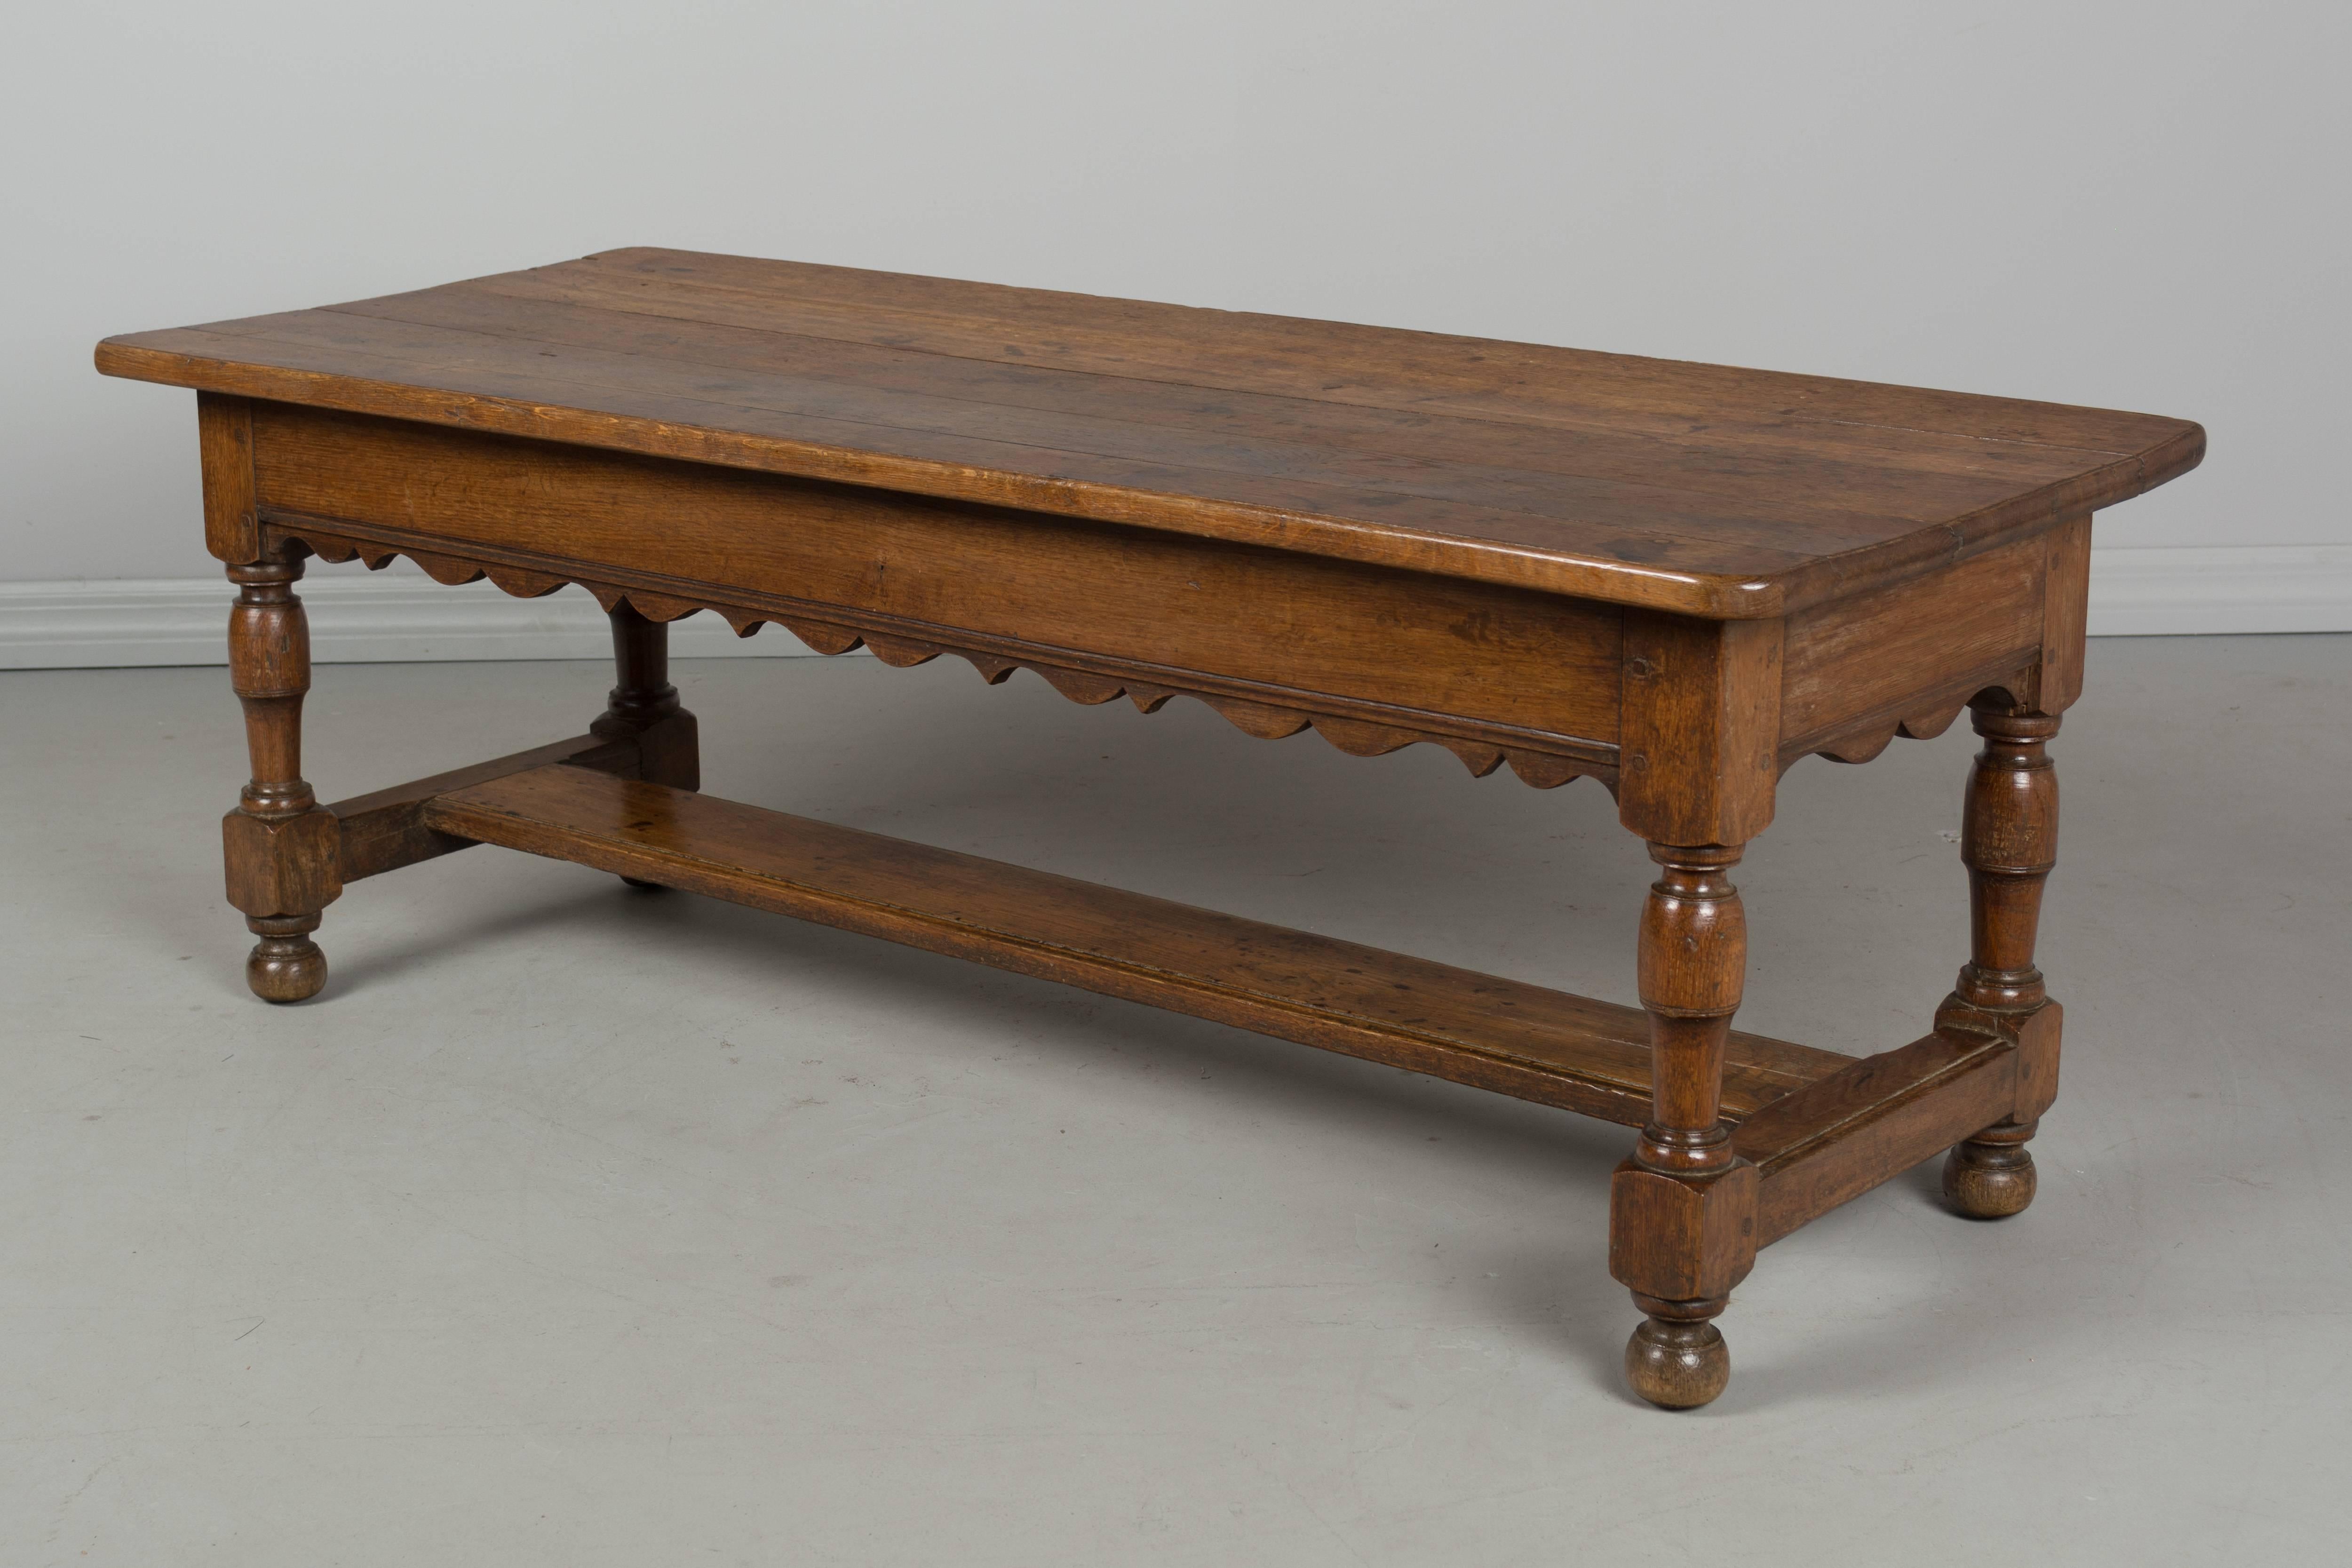 A 19th century Country French bench made of solid oak with scalloped apron and turned legs. Very sturdy with pegged construction and stretcher. Nice proportions for use as a coffee table. Waxed finish. Top is slightly off center. More photos